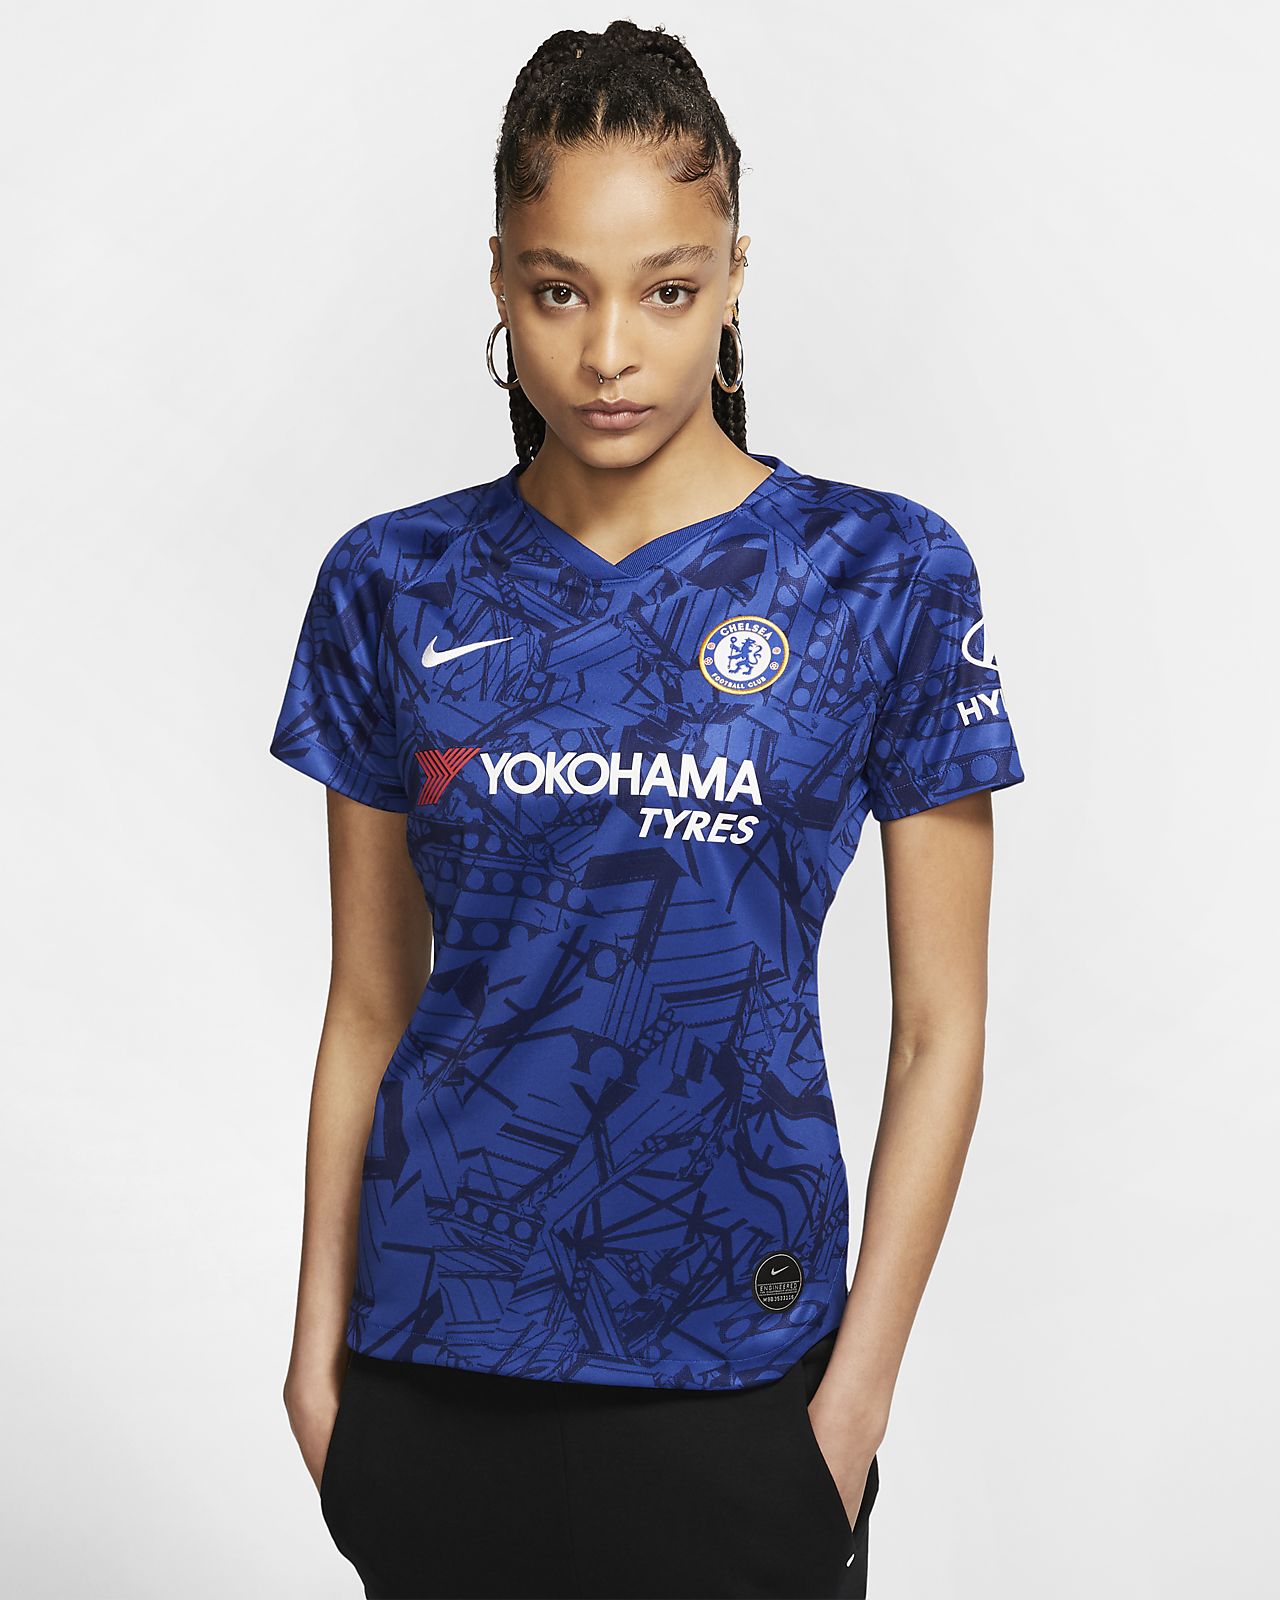 NIKE Official]Chelsea FC 2019/20 